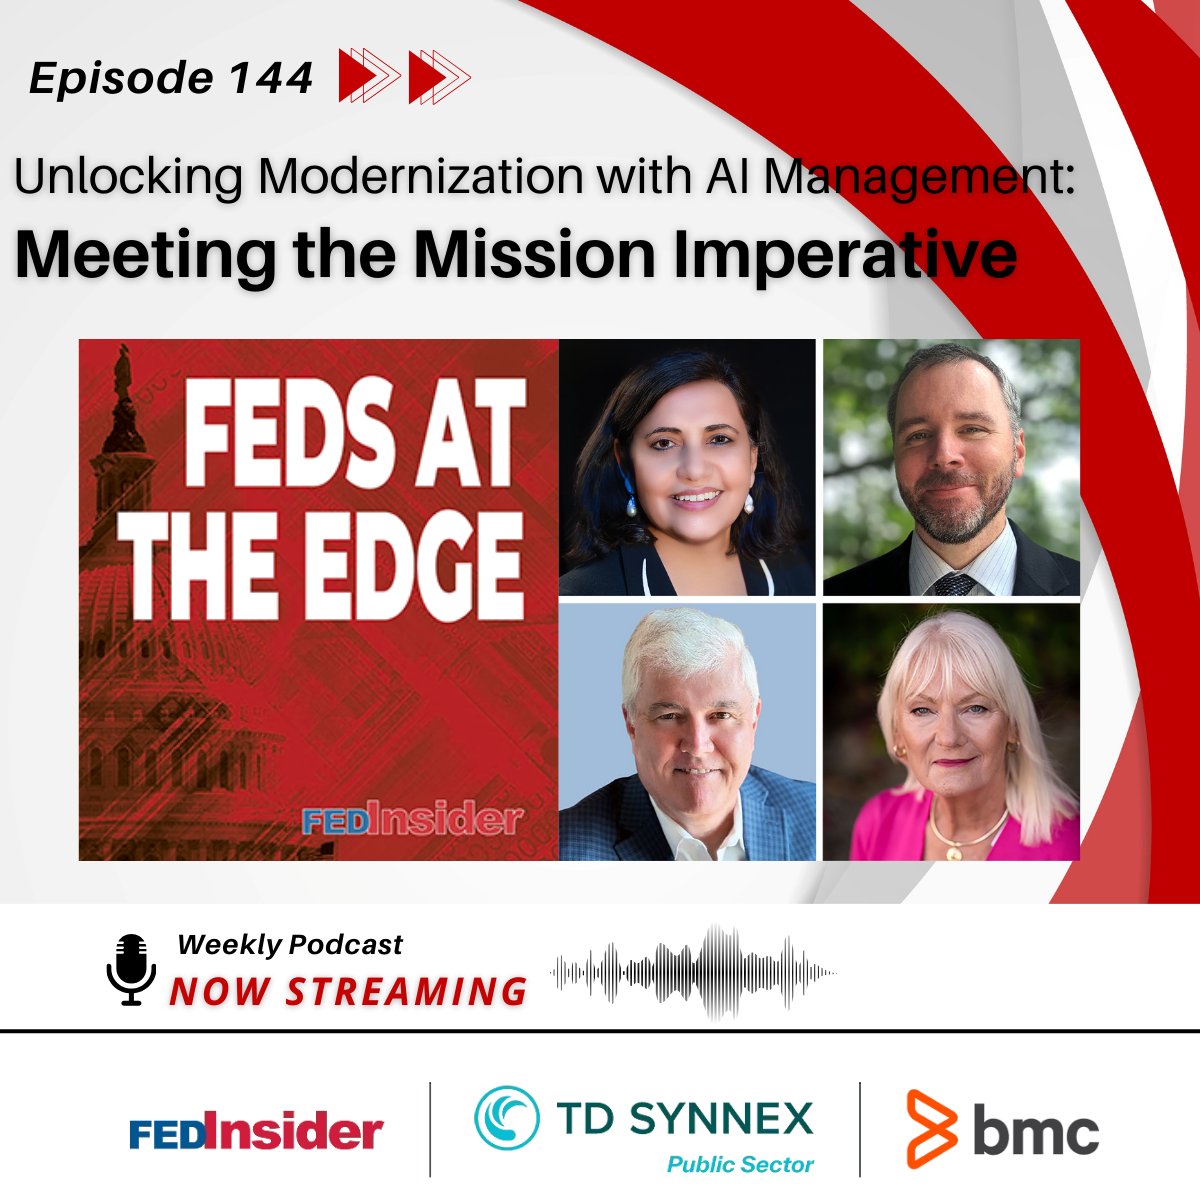 In @FedInsider latest #FATE podcast,we showcase two of the biggest issues agencies face while implementing AI; legacy systems & managing risks, and how leaders are tackling them with @USPS @USGAO @BMCSoftware Listen now: tinyurl.com/4rc2ja72 @PegHosky @TDSYNNEX